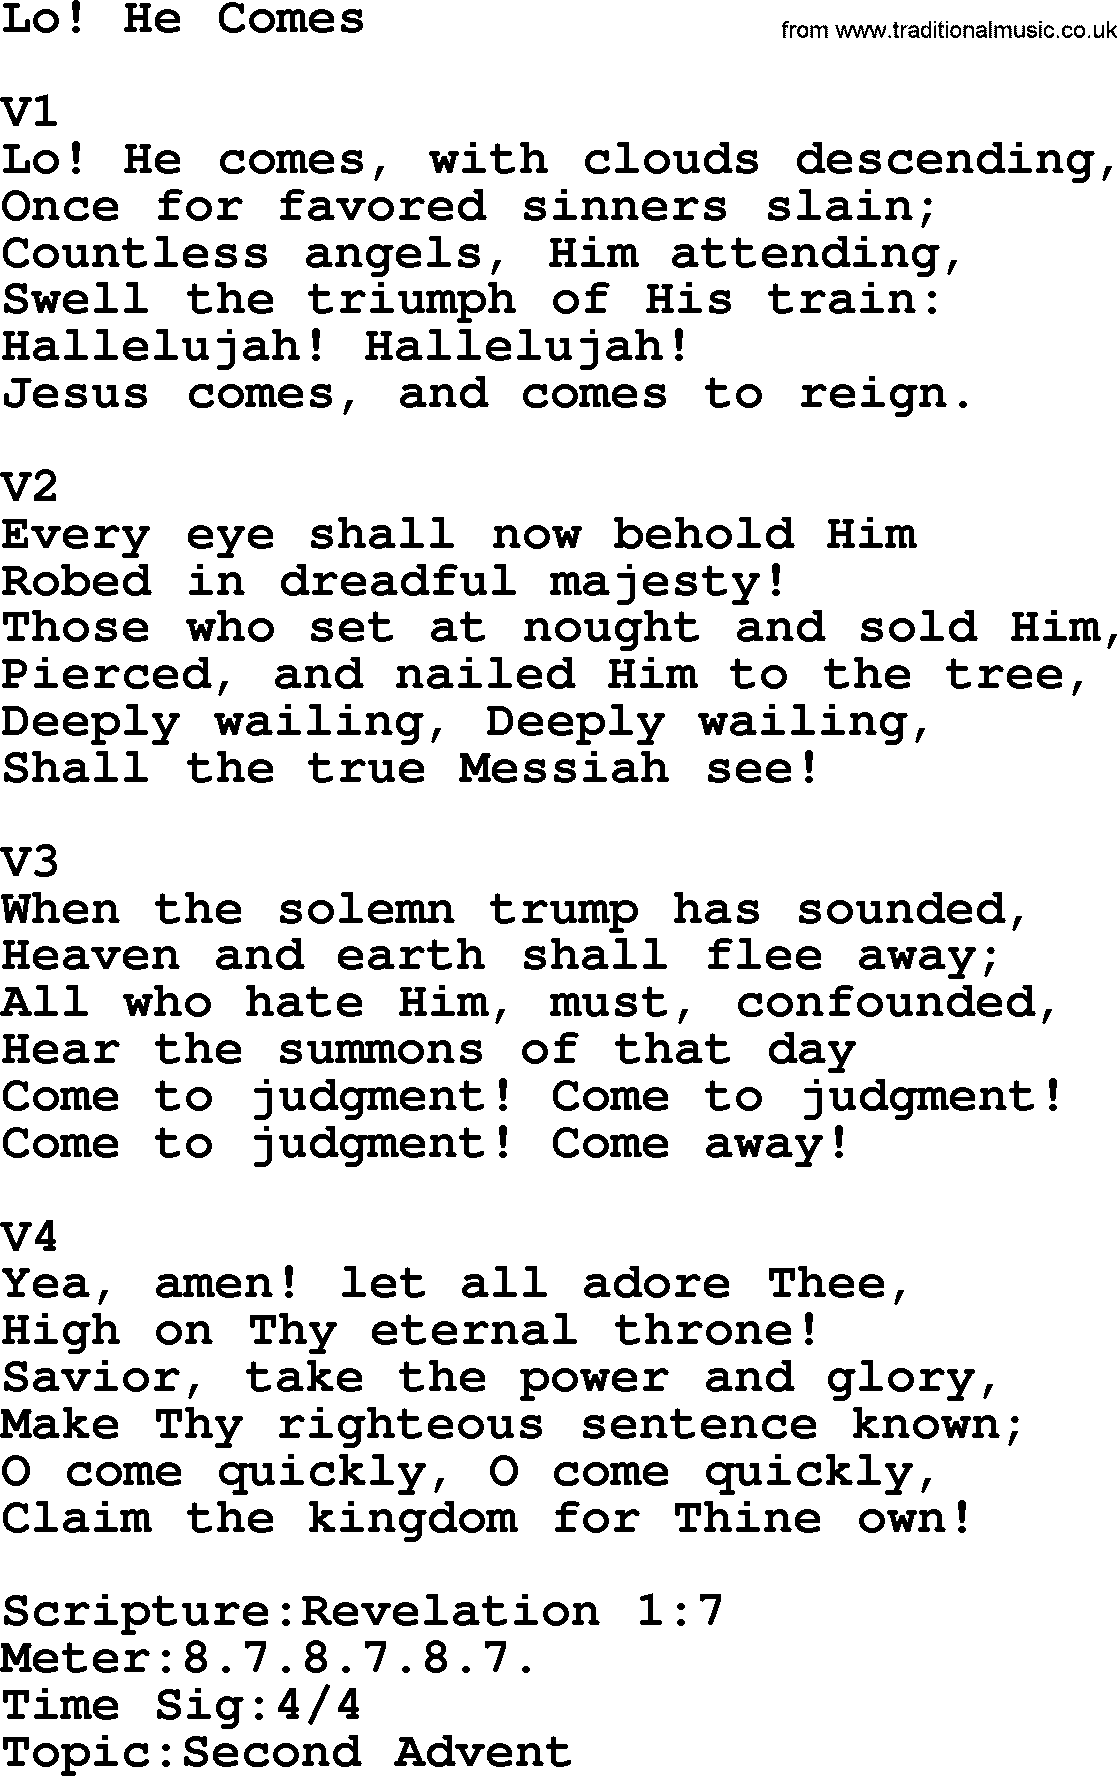 Adventist Hynms collection, Hymn: Lo! He Comes, lyrics with PDF